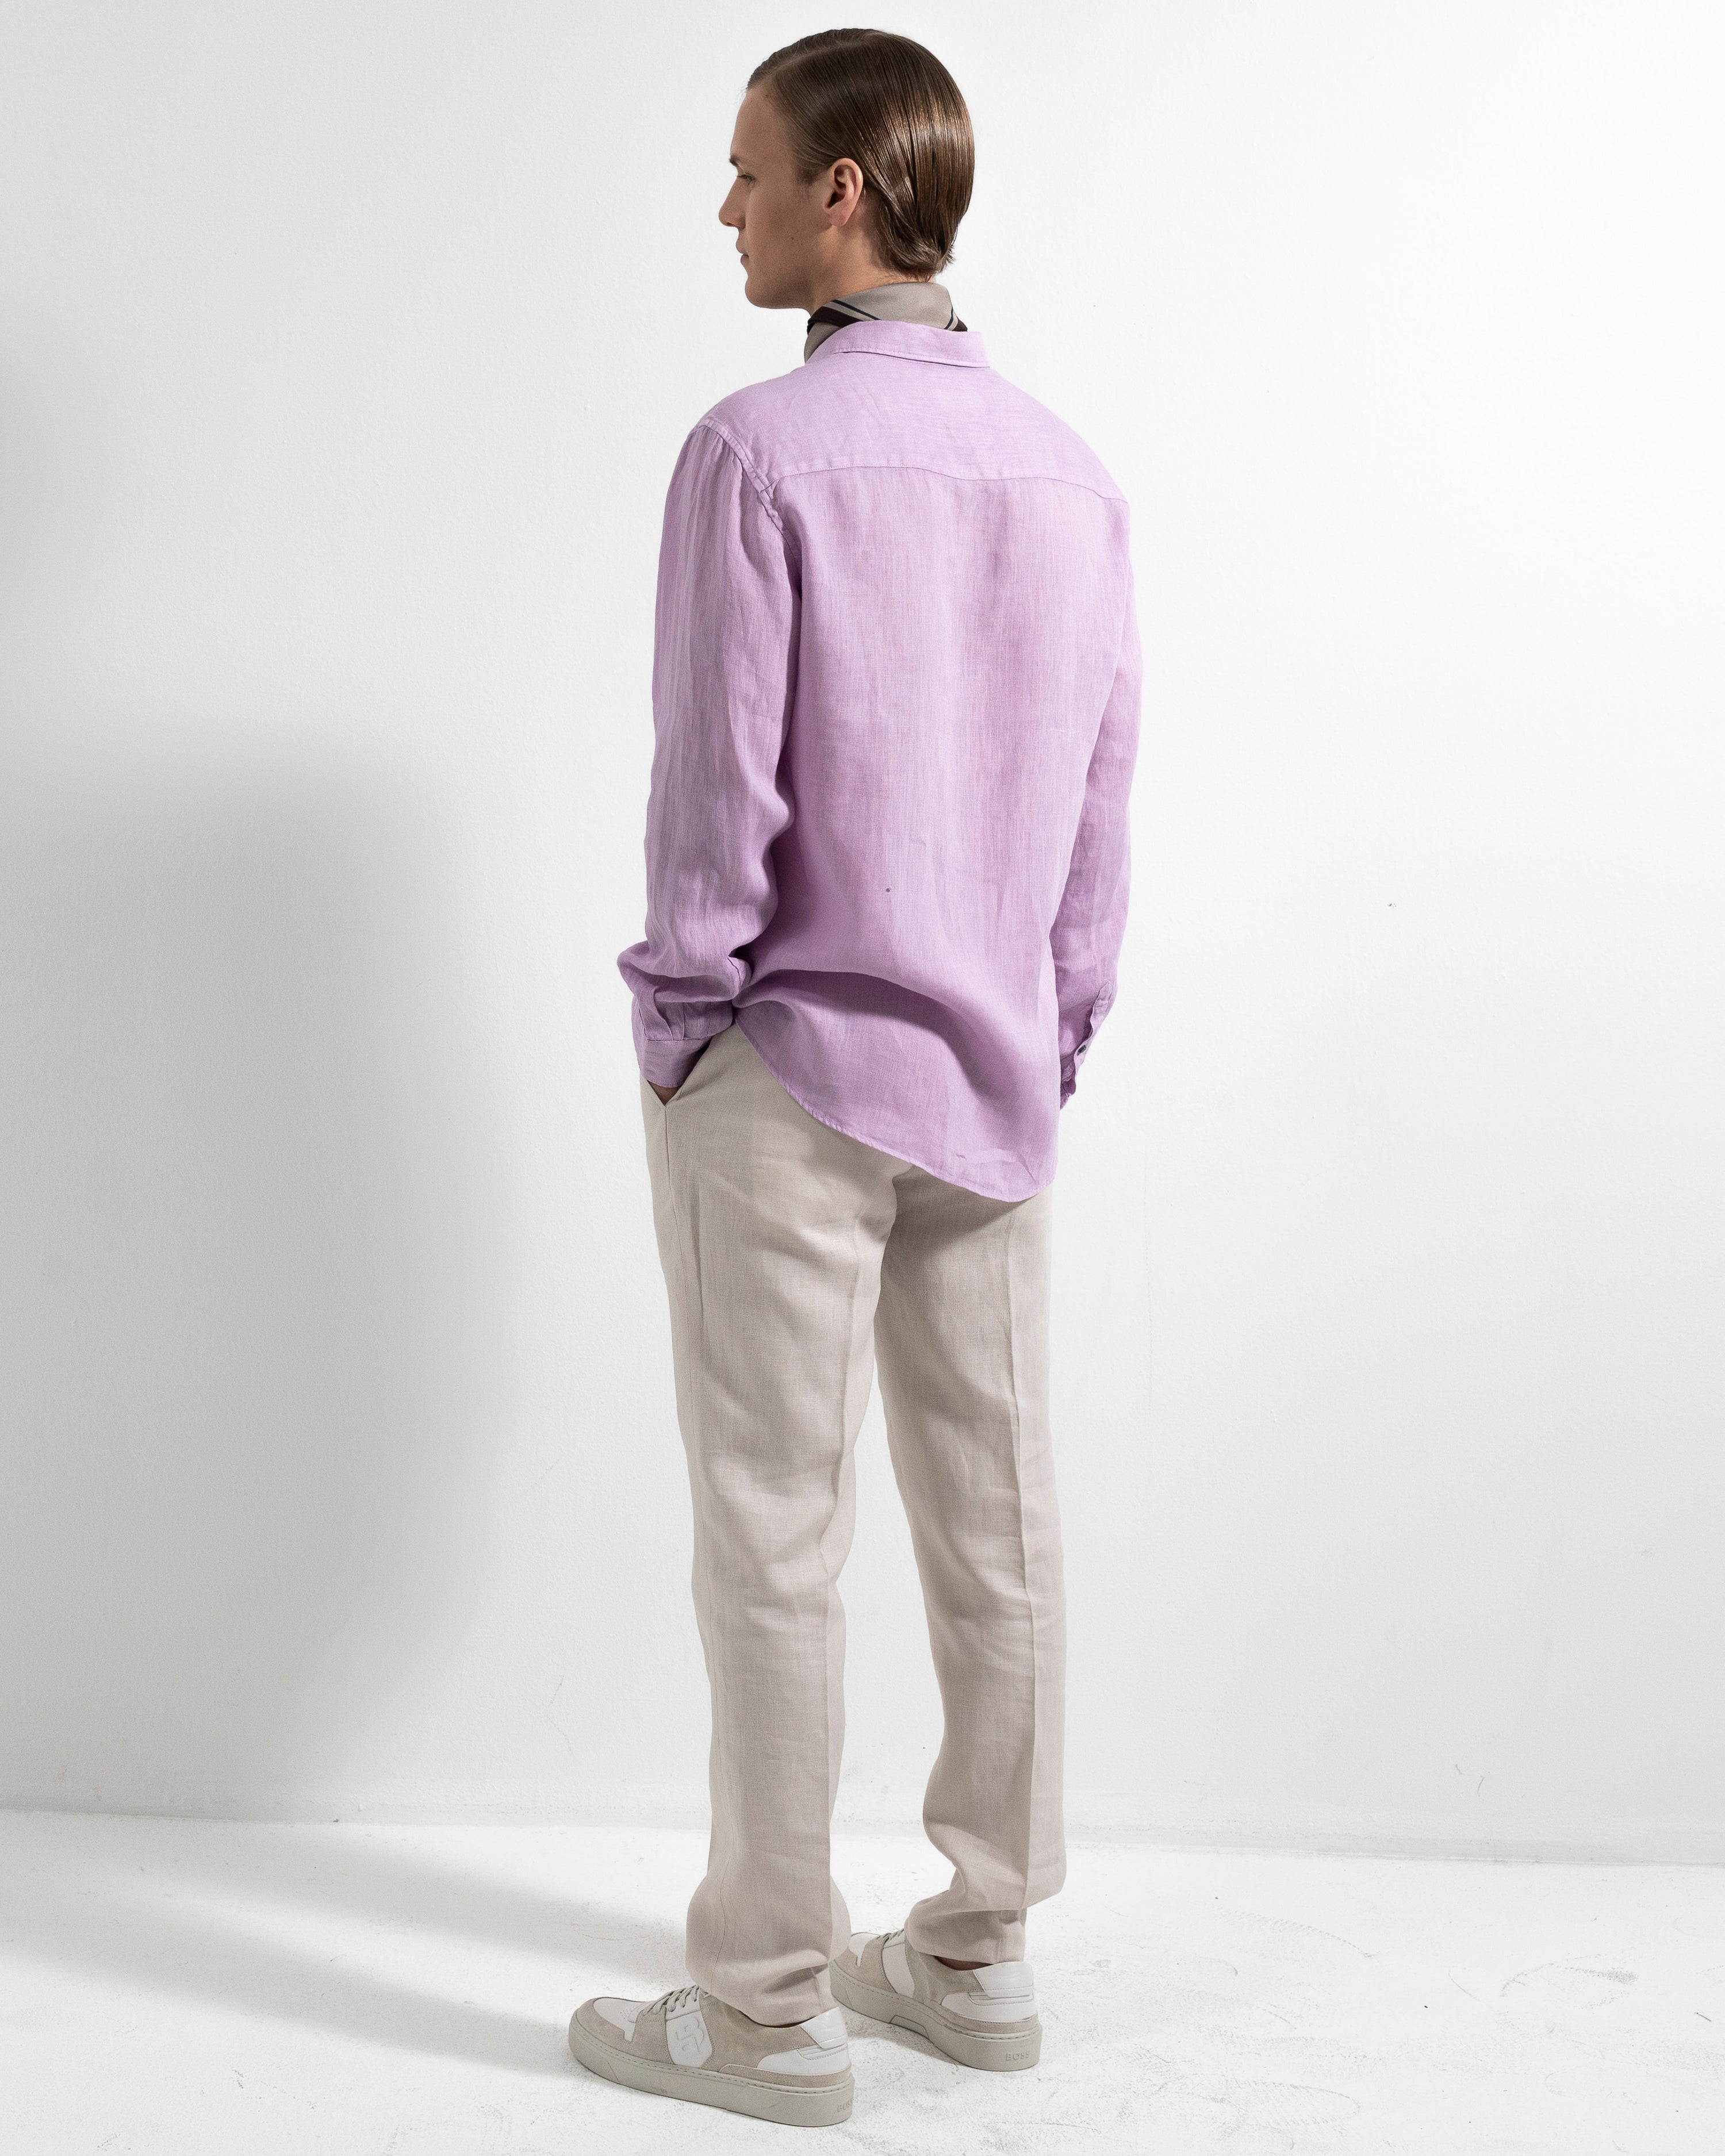 Washed Linen Shirt - Dusty Orchid